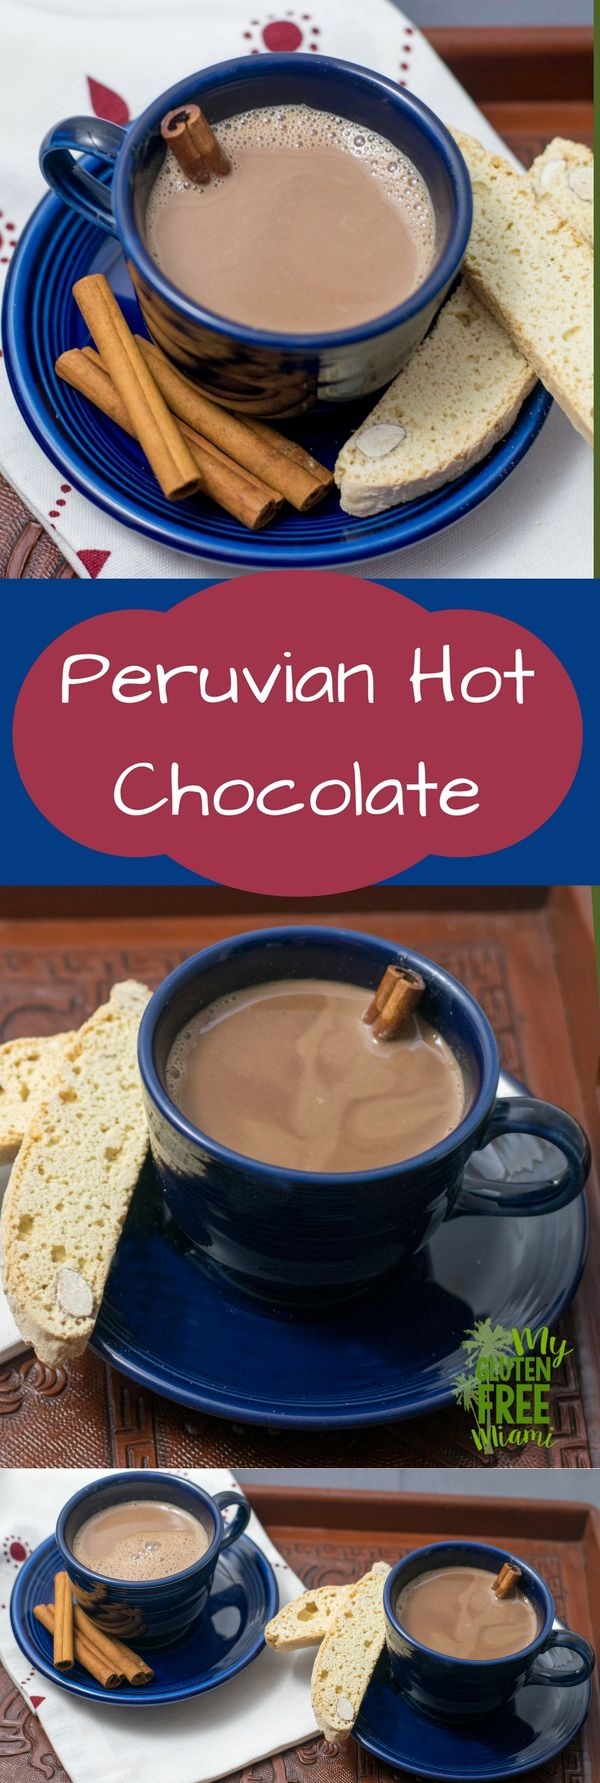 Peruvian Hot Chocolate infused with Cinnamon and Allspice